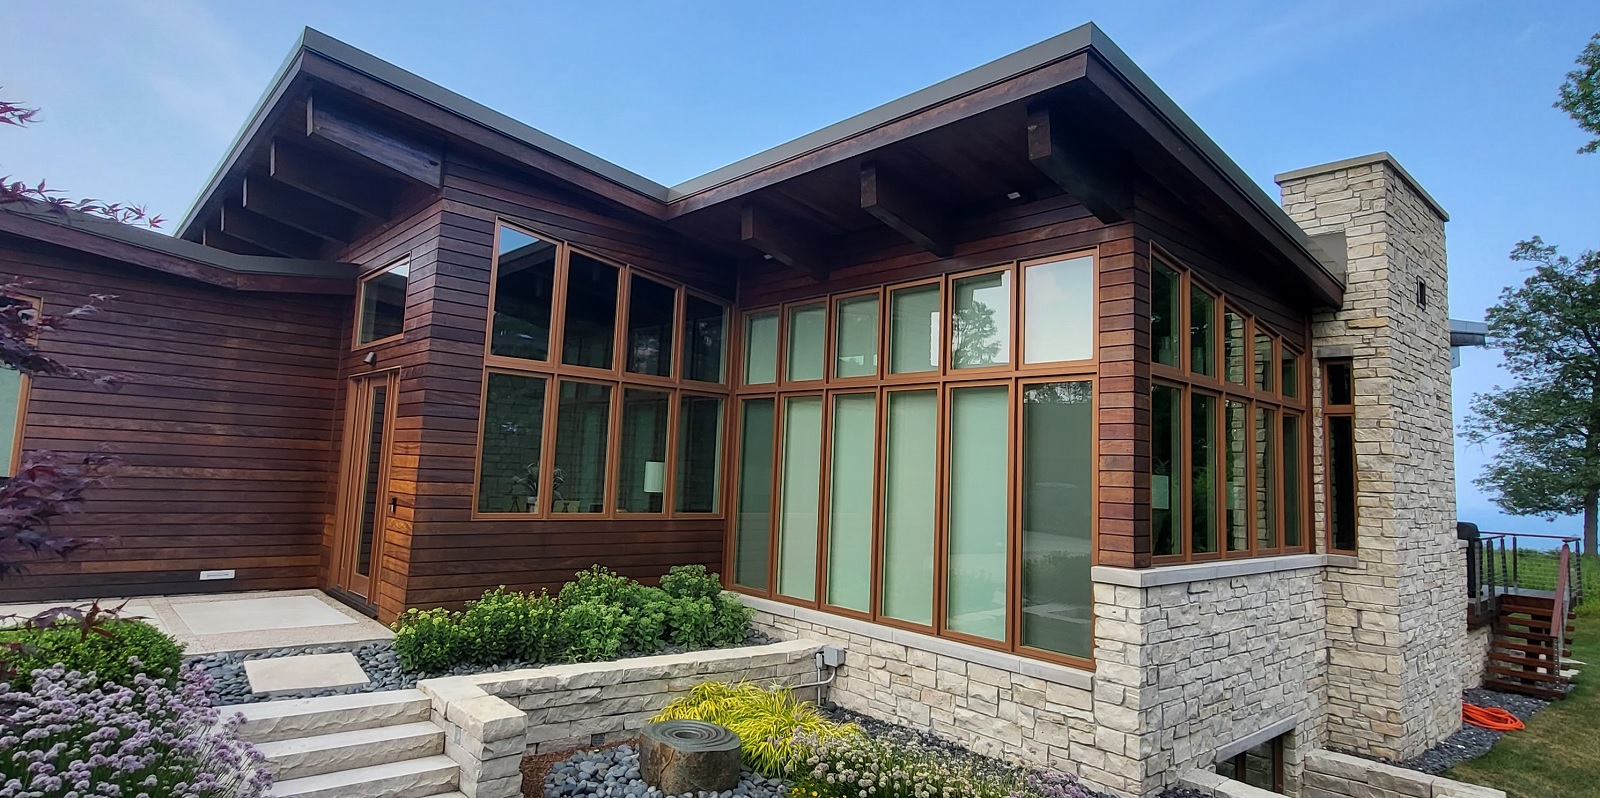 Front view of the butterfly house custom home designed and built by Mikkelson builders.  Modern prairie style featuring slanted roofs and large windows